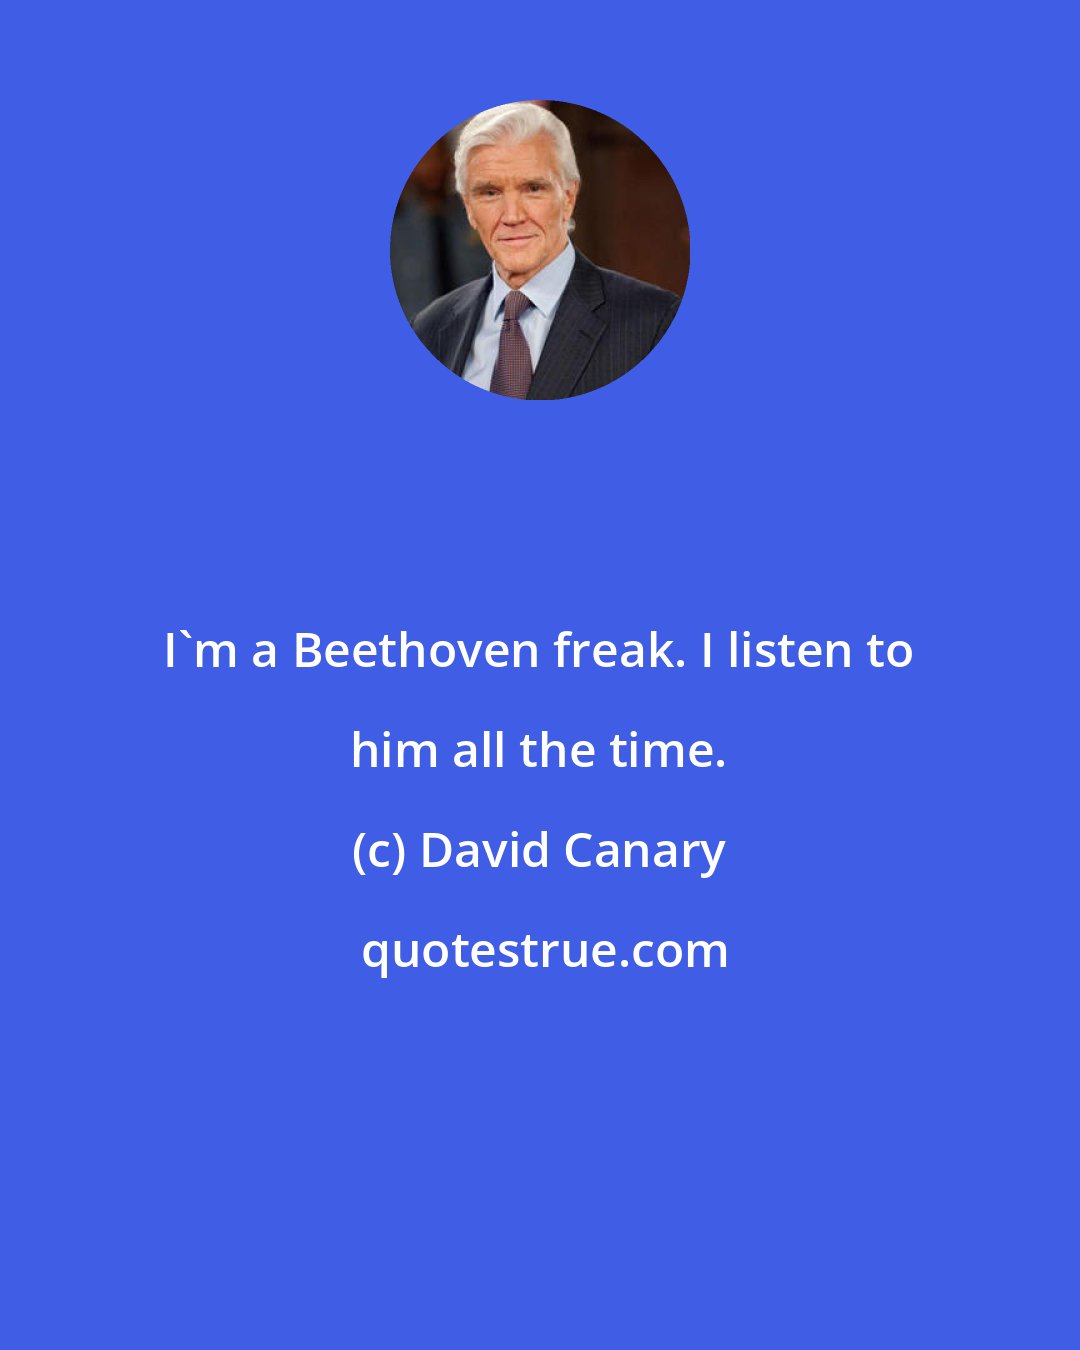 David Canary: I'm a Beethoven freak. I listen to him all the time.